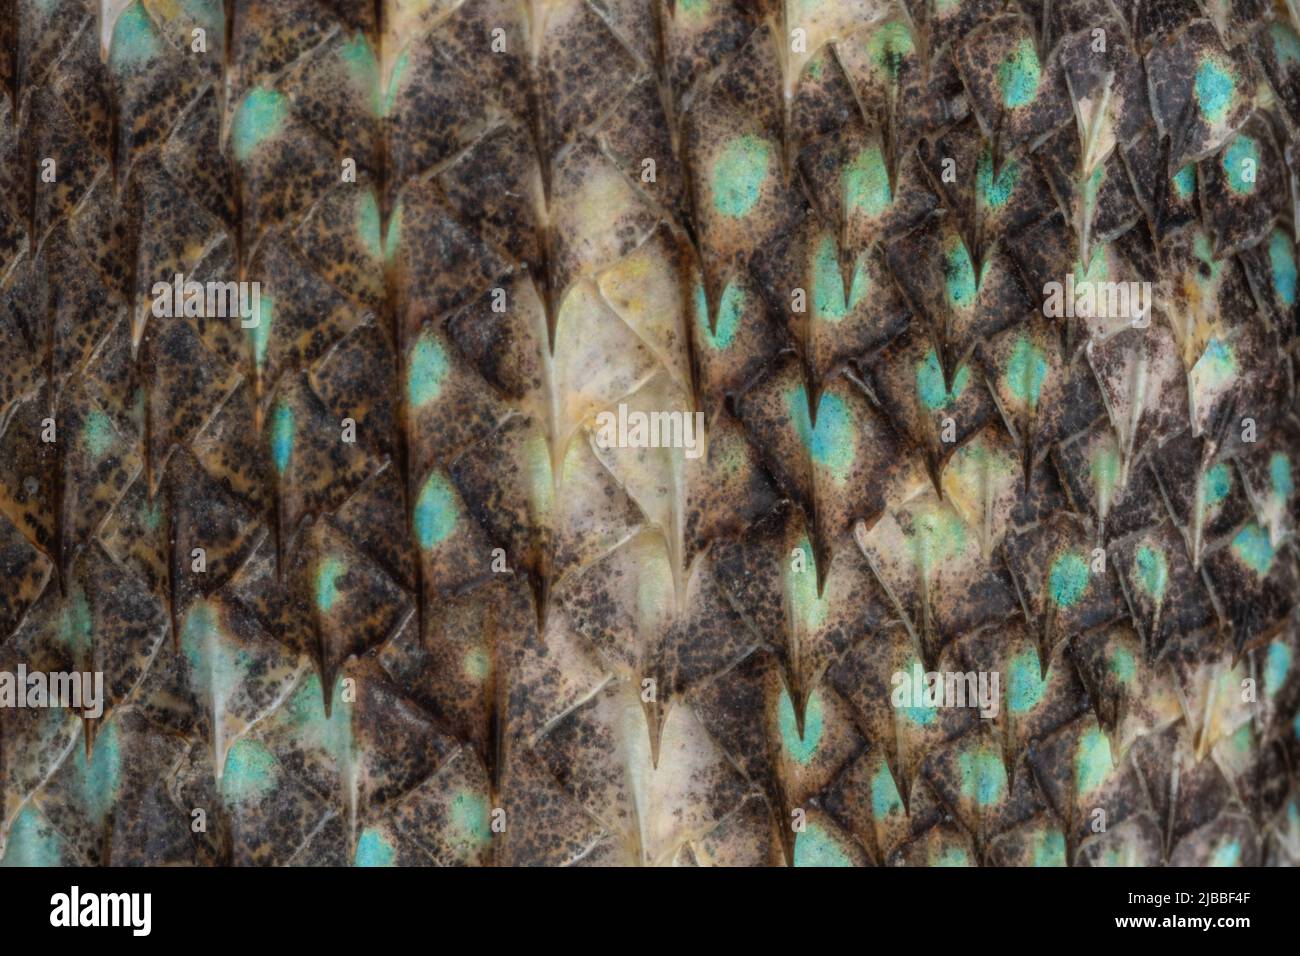 The colorful natural pattern of the dorsal scales of a western fence lizard (Sceloporus occidentalis) from the Central valley of California. Stock Photo